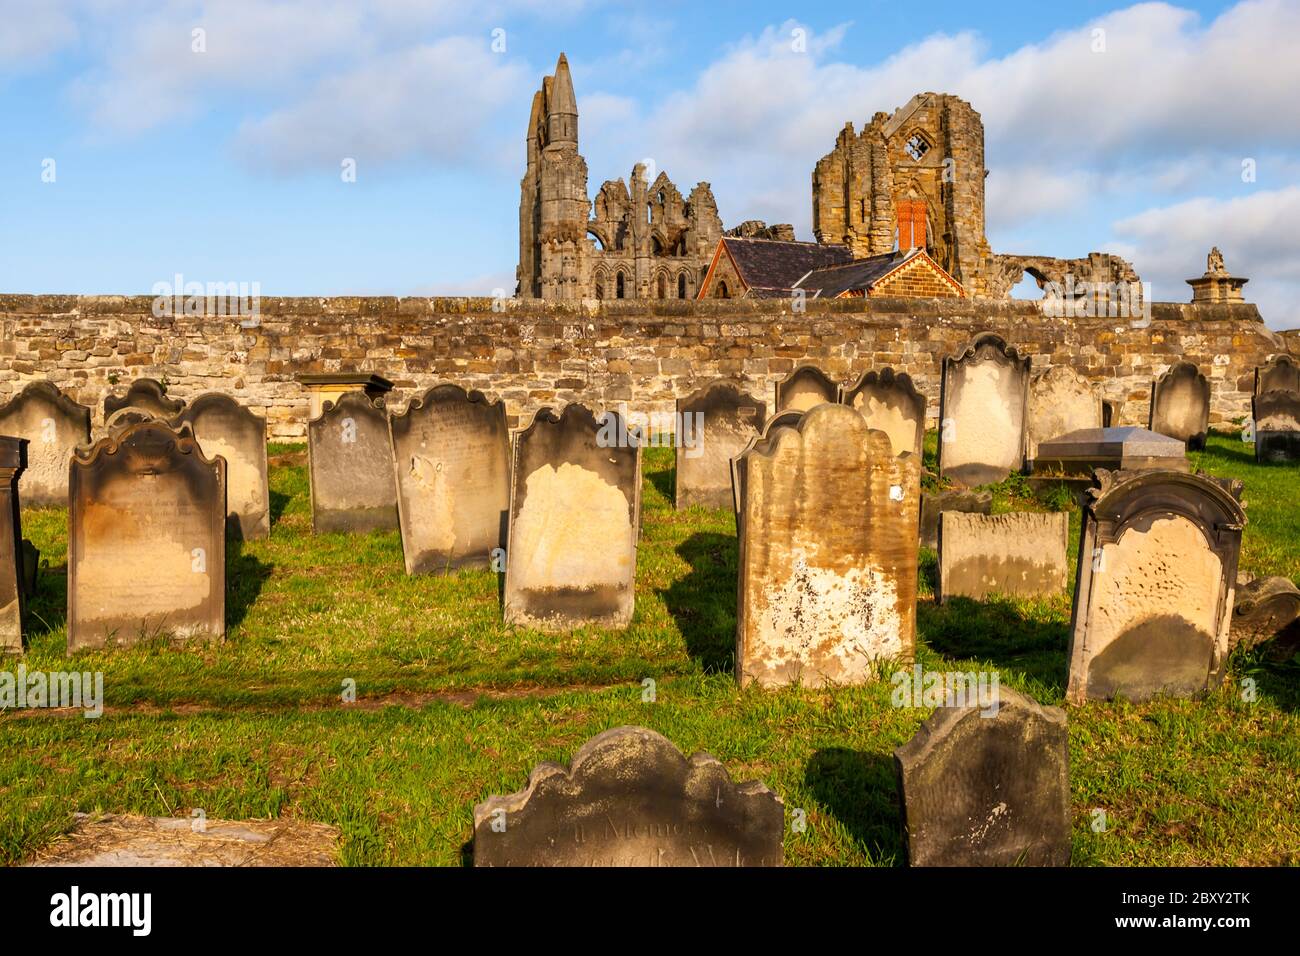 Cemetery at the Church of St Mary in Whitby, Scarborough, England Stock Photo